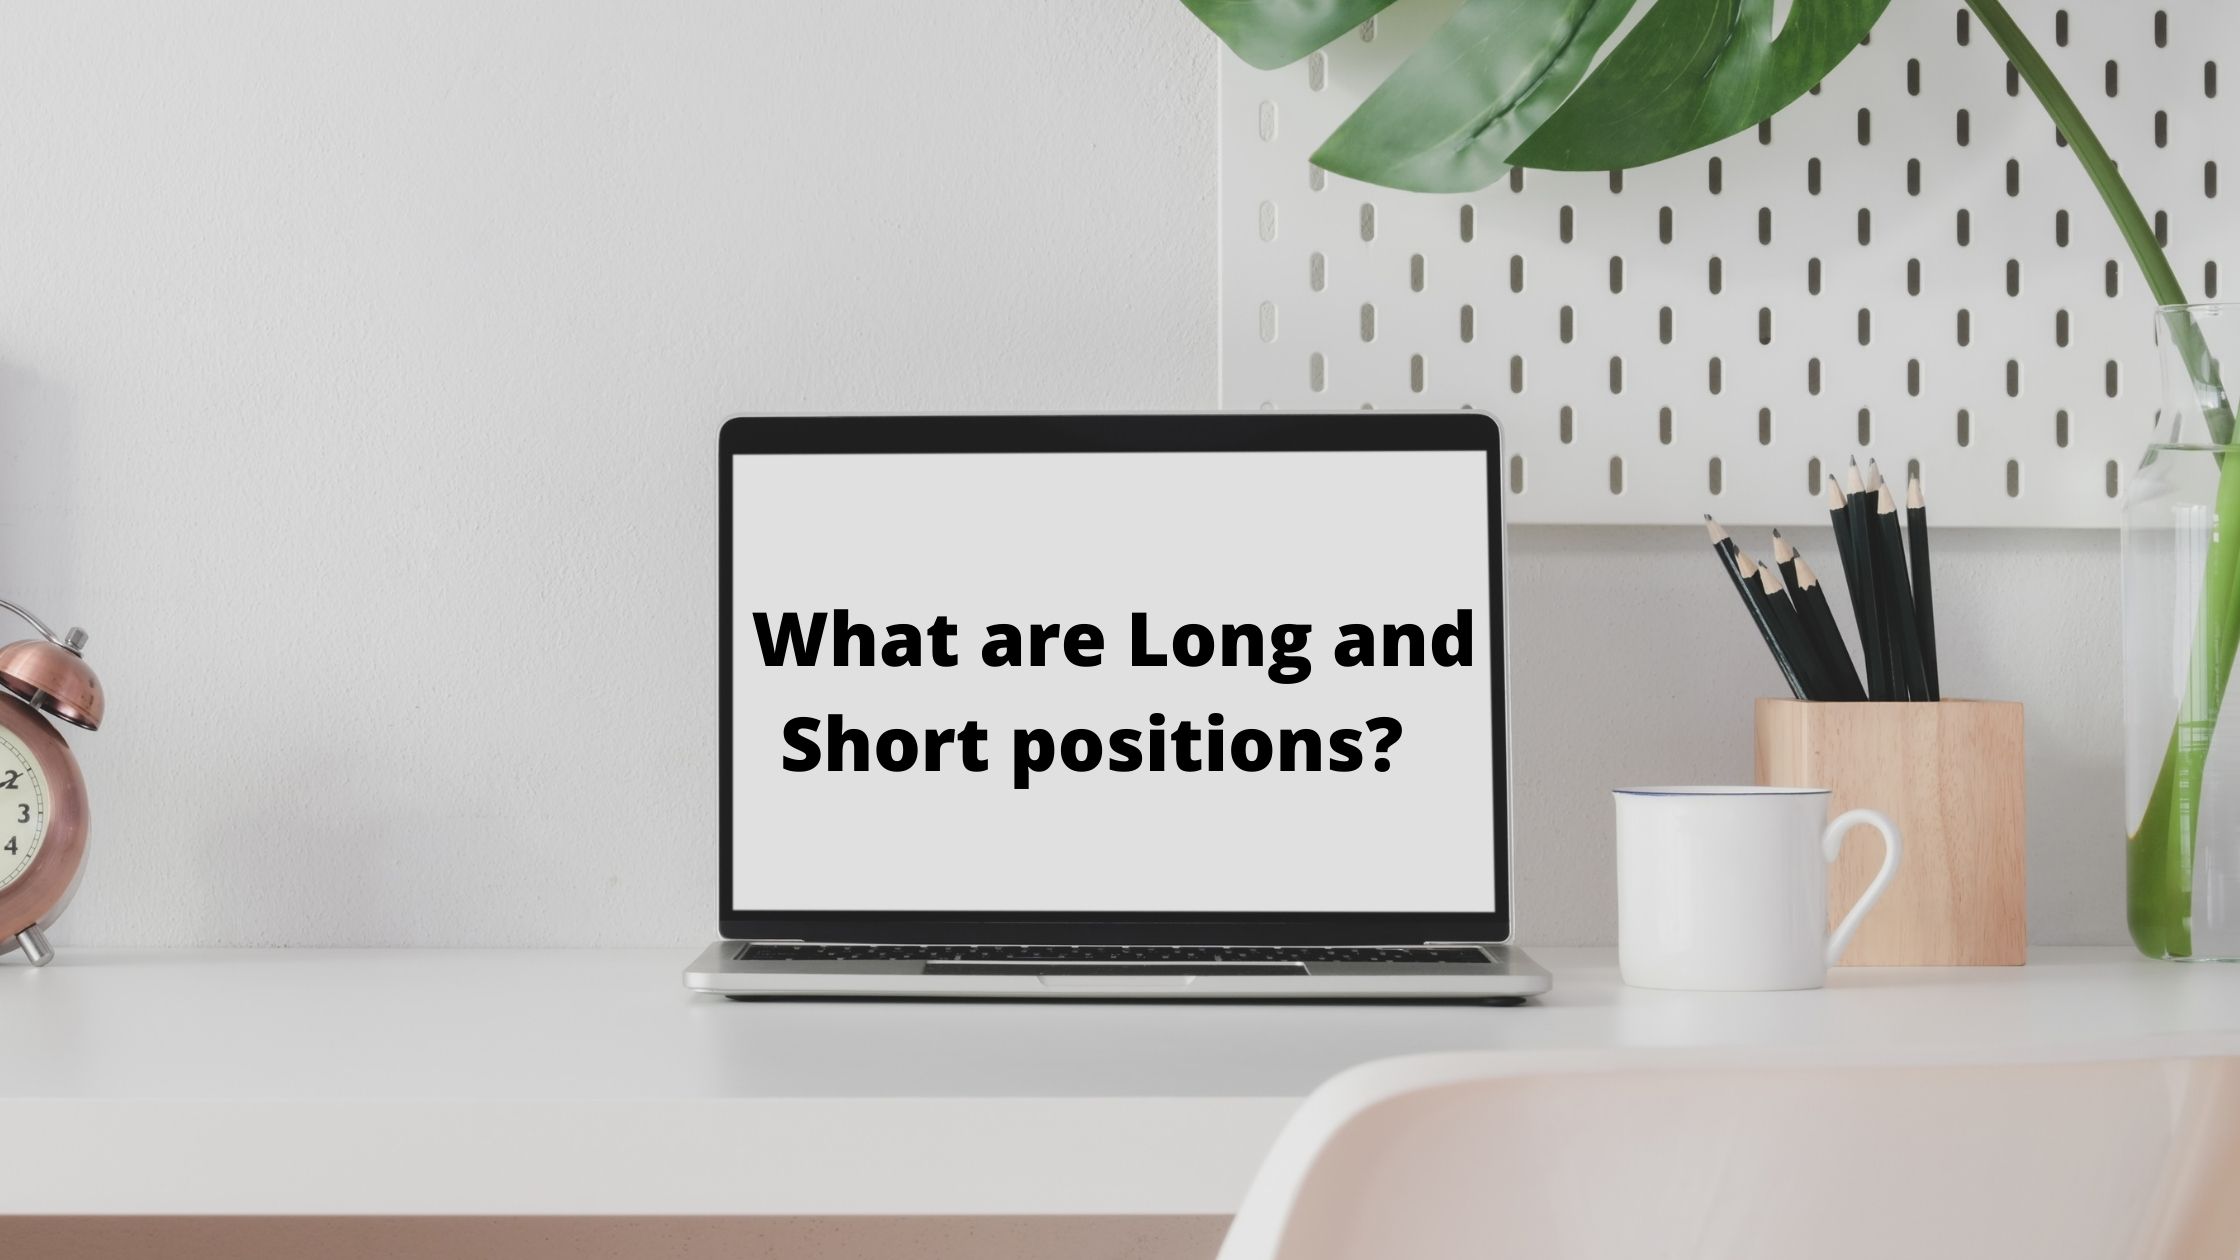 What are Long and Short positions